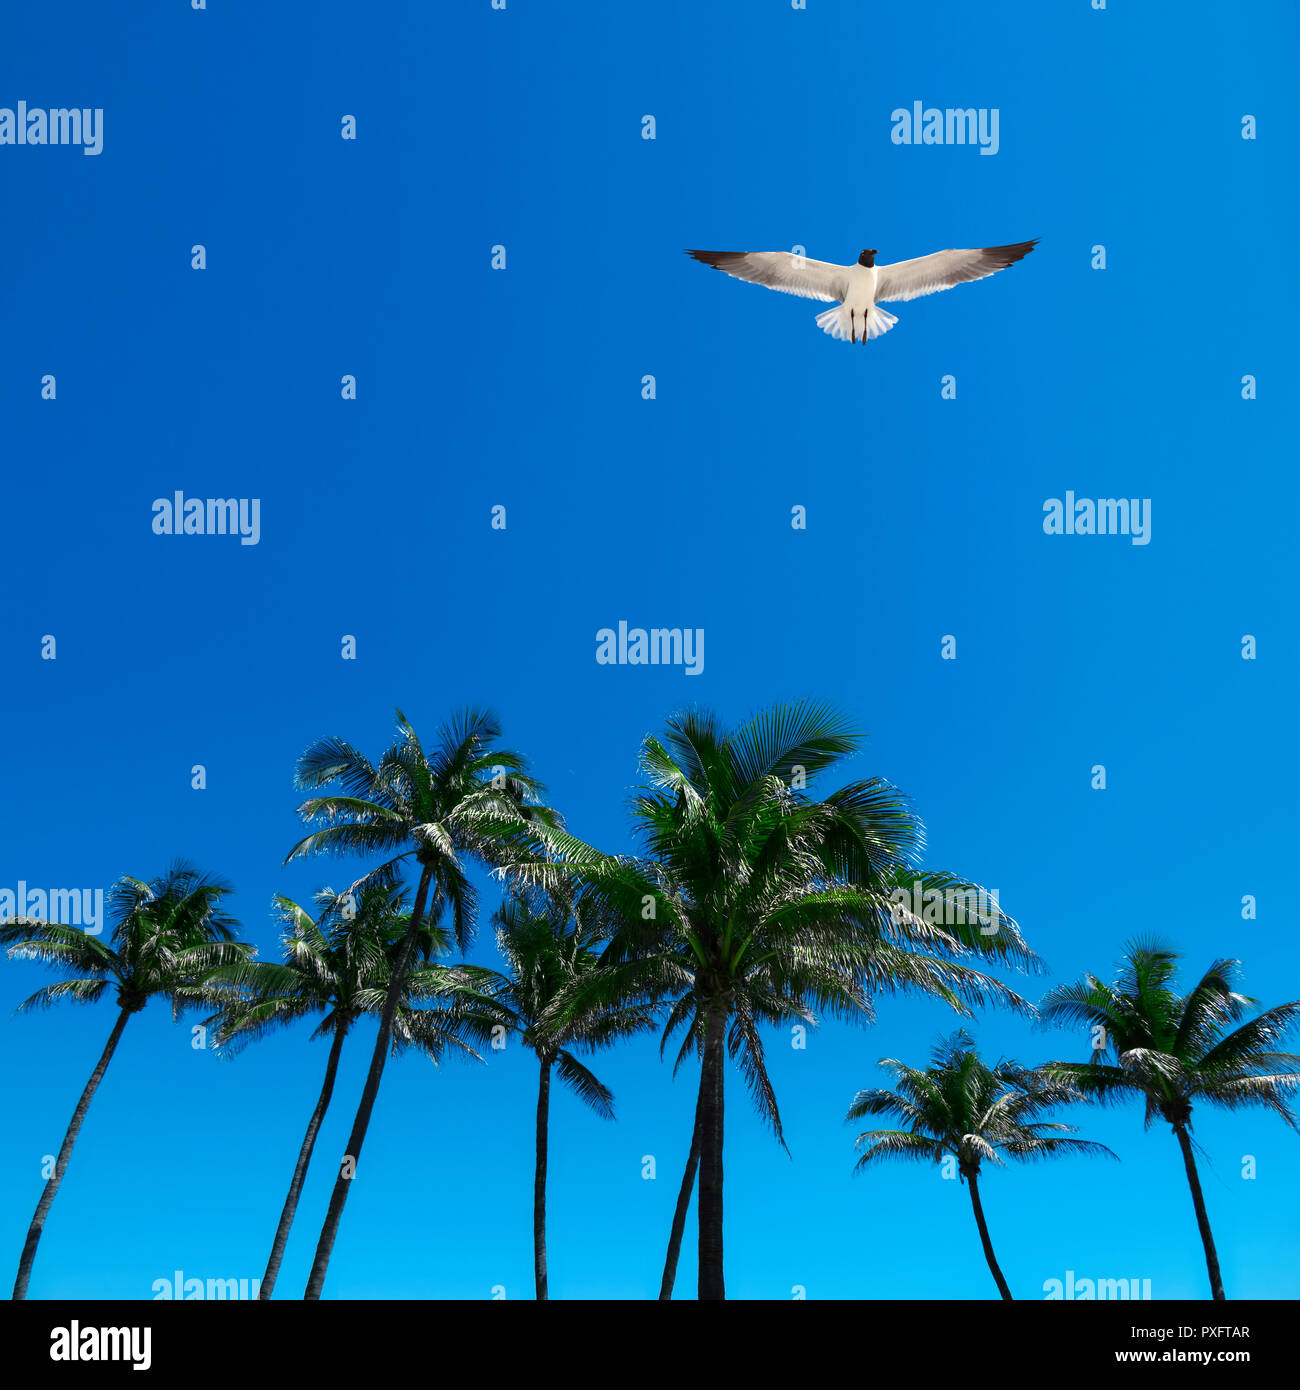 Group of tall palm trees and flying seagull over clear blue sky in Deerfield beach, Florida, USA Stock Photo